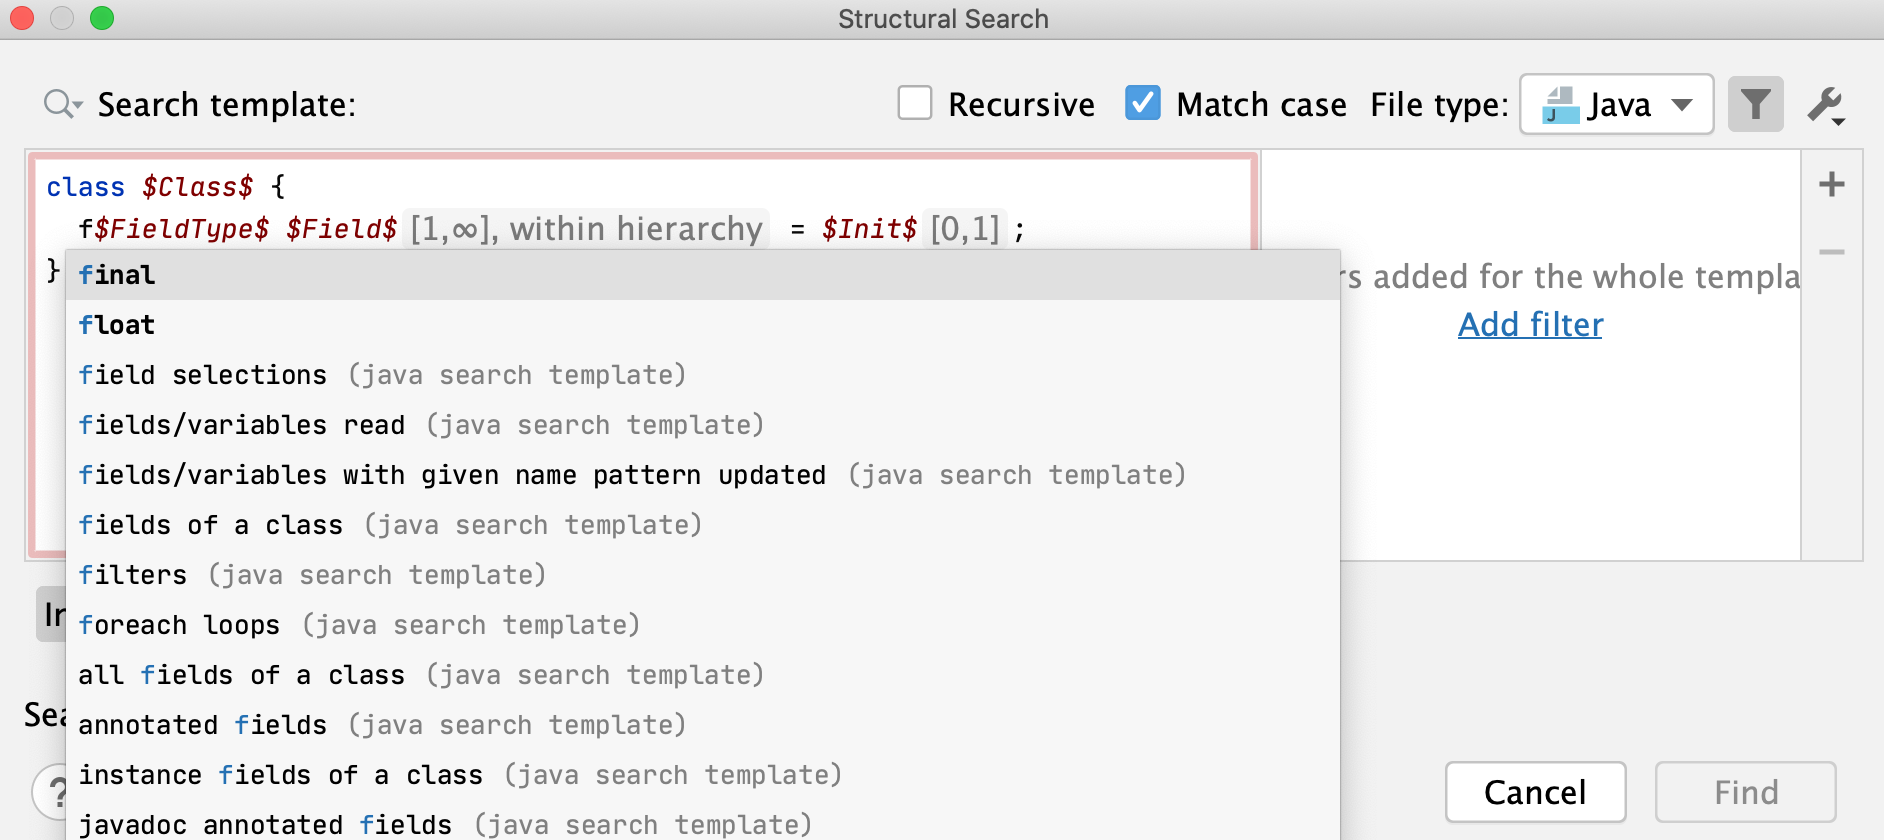 Code completion in the Structural Search dialog